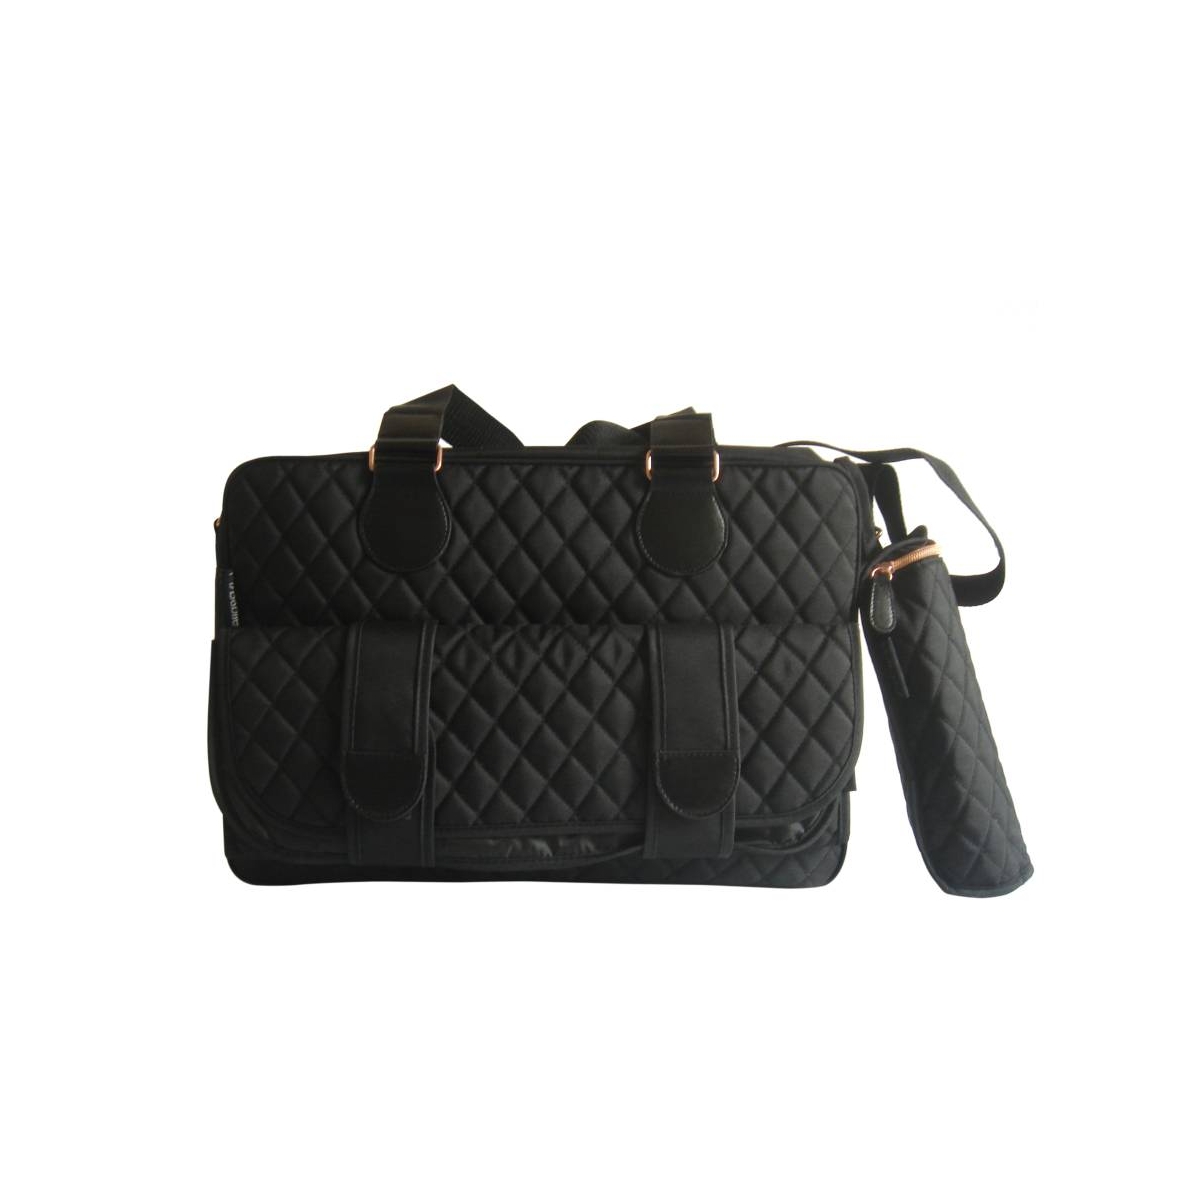 My Babiie Billie Faiers Quilted Deluxe Baby Changing Bag